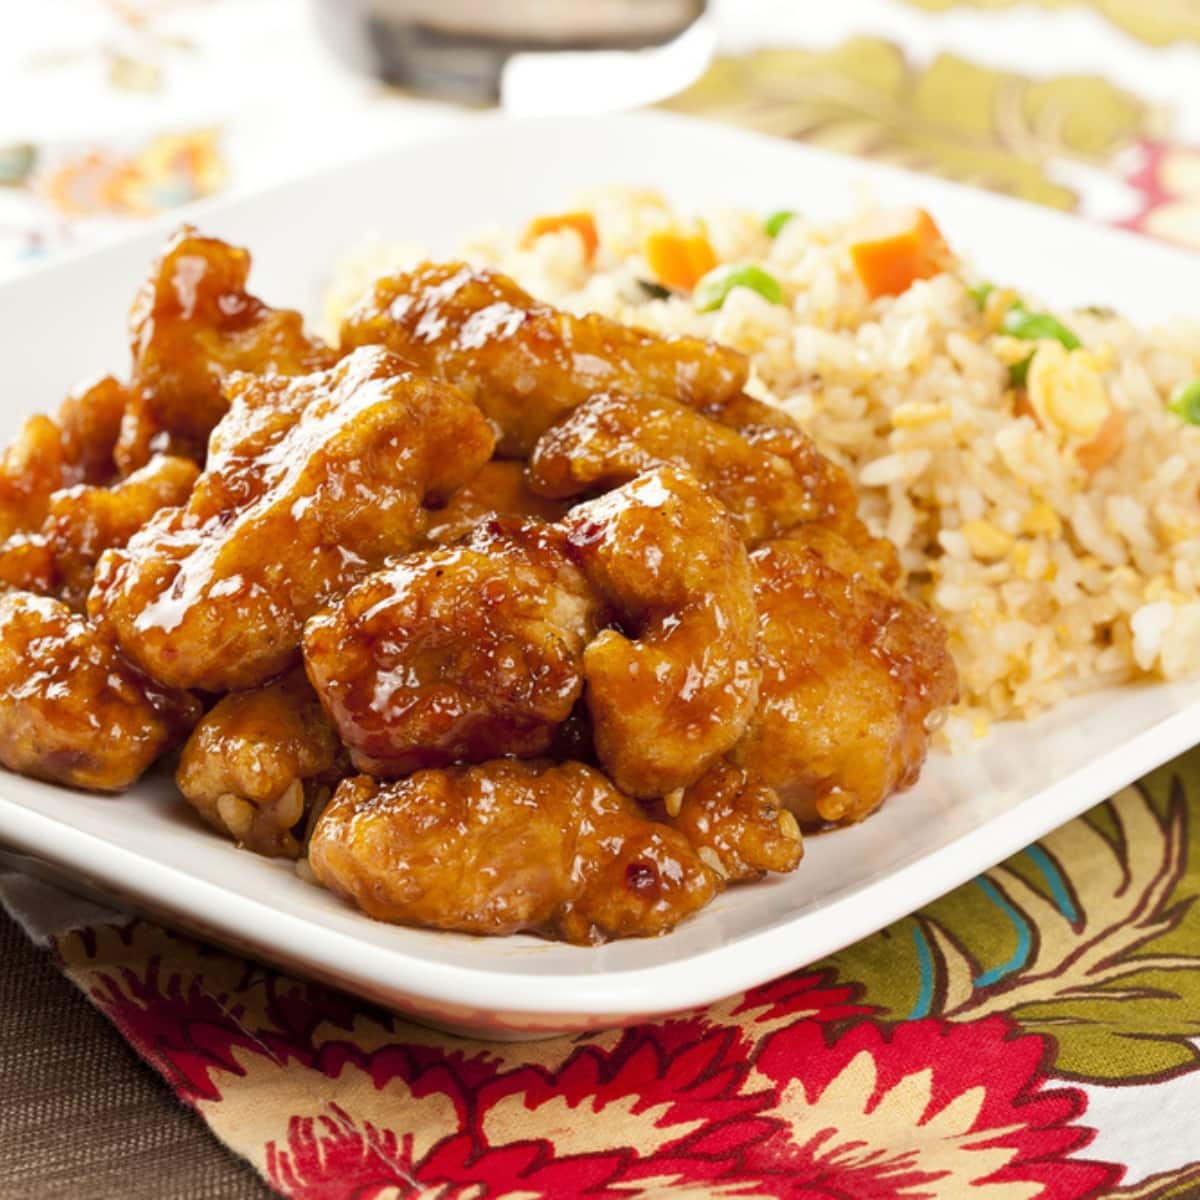 A plate of Orange Chicken served with fried rice 